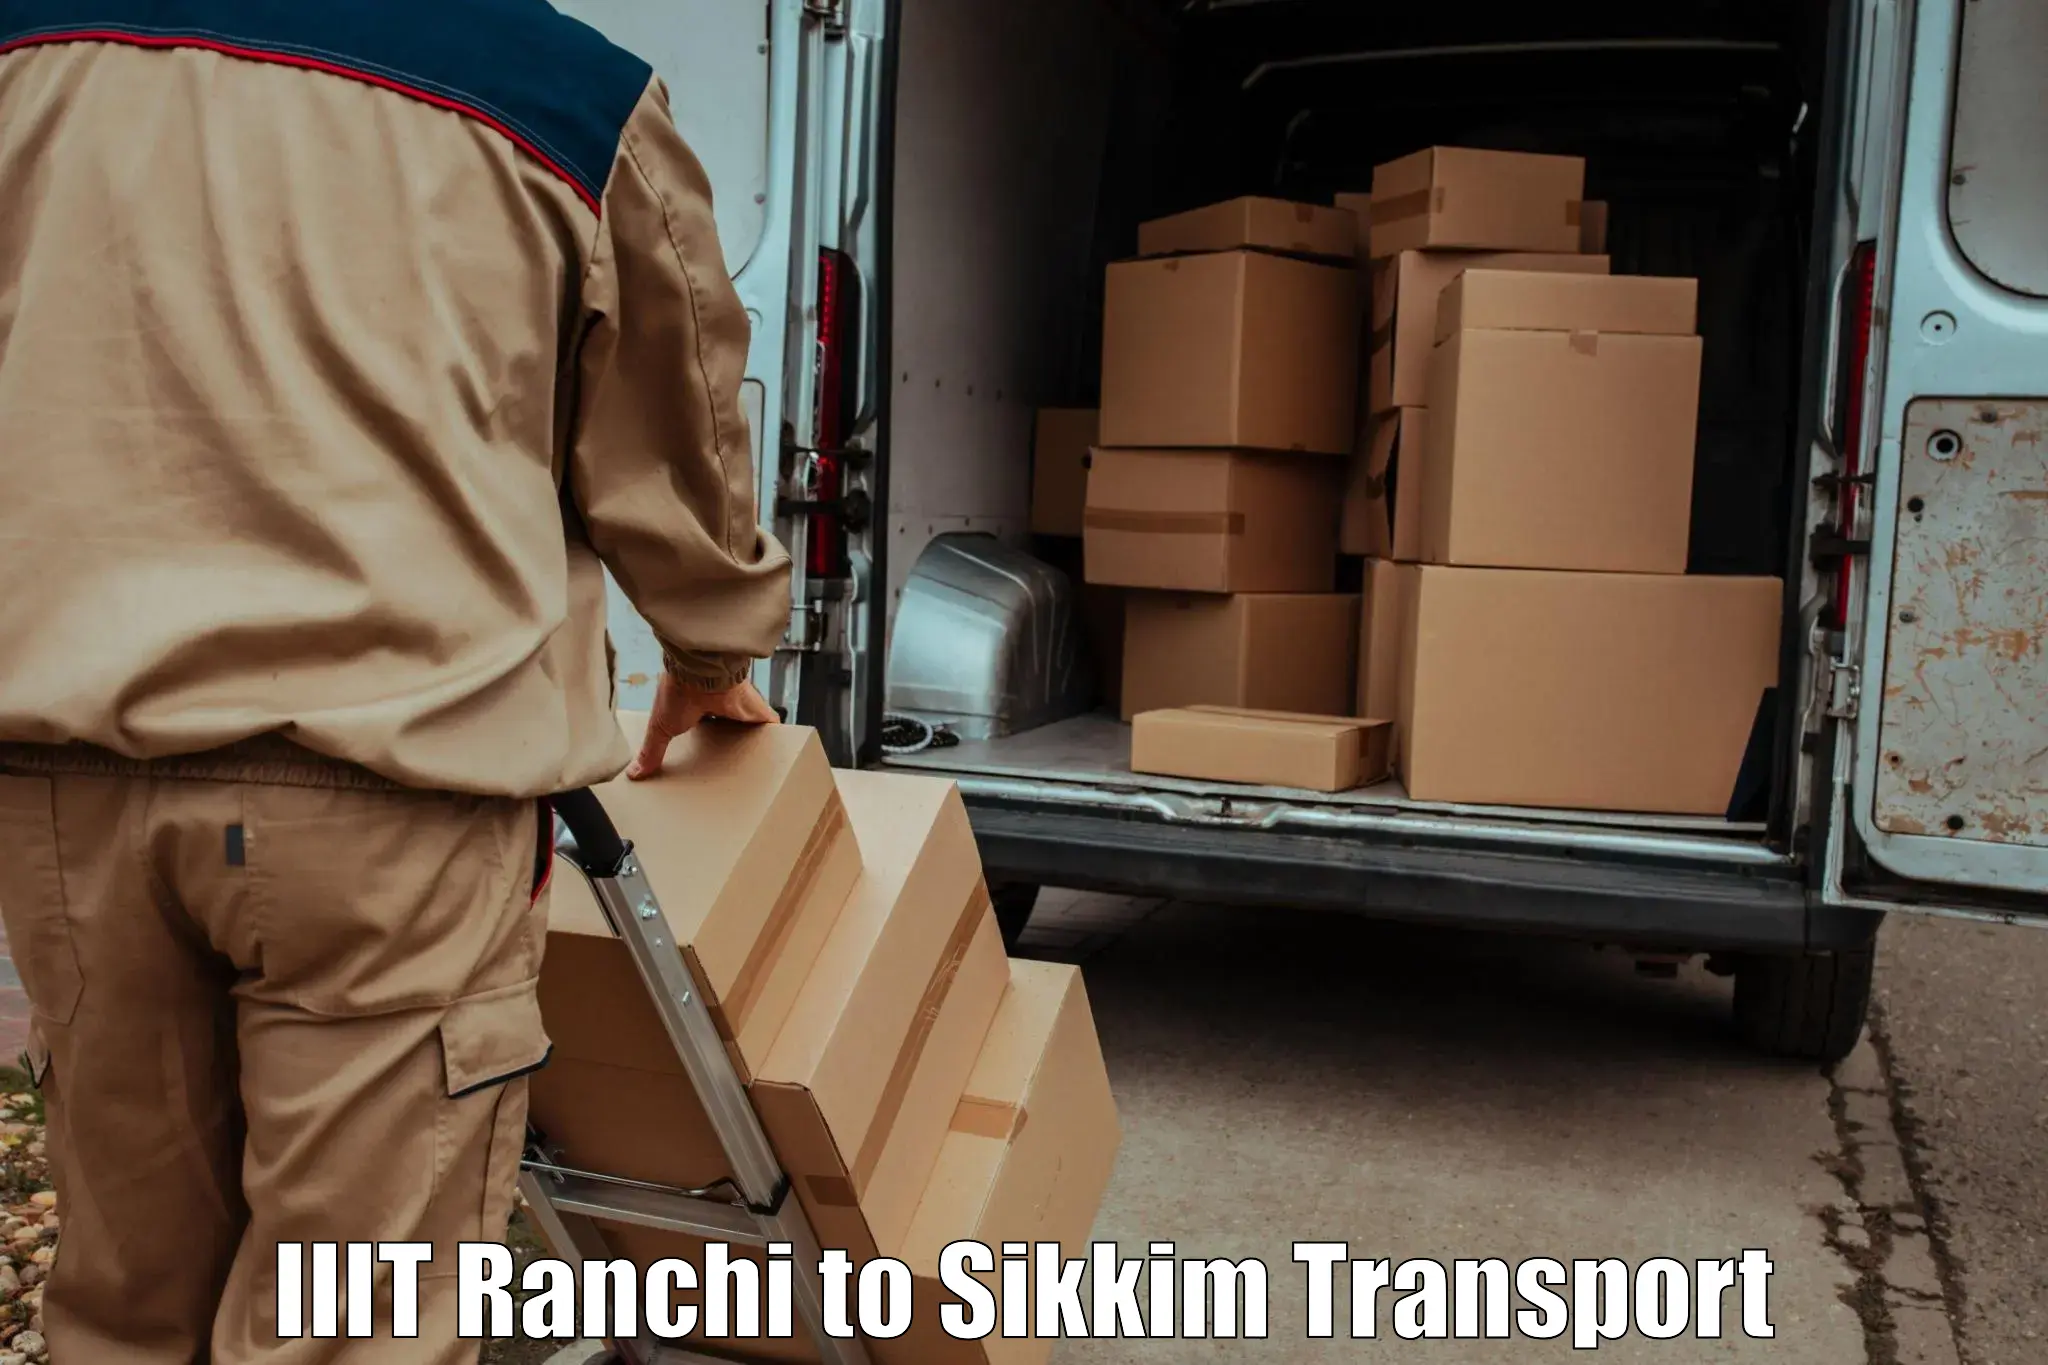 Interstate transport services in IIIT Ranchi to Mangan